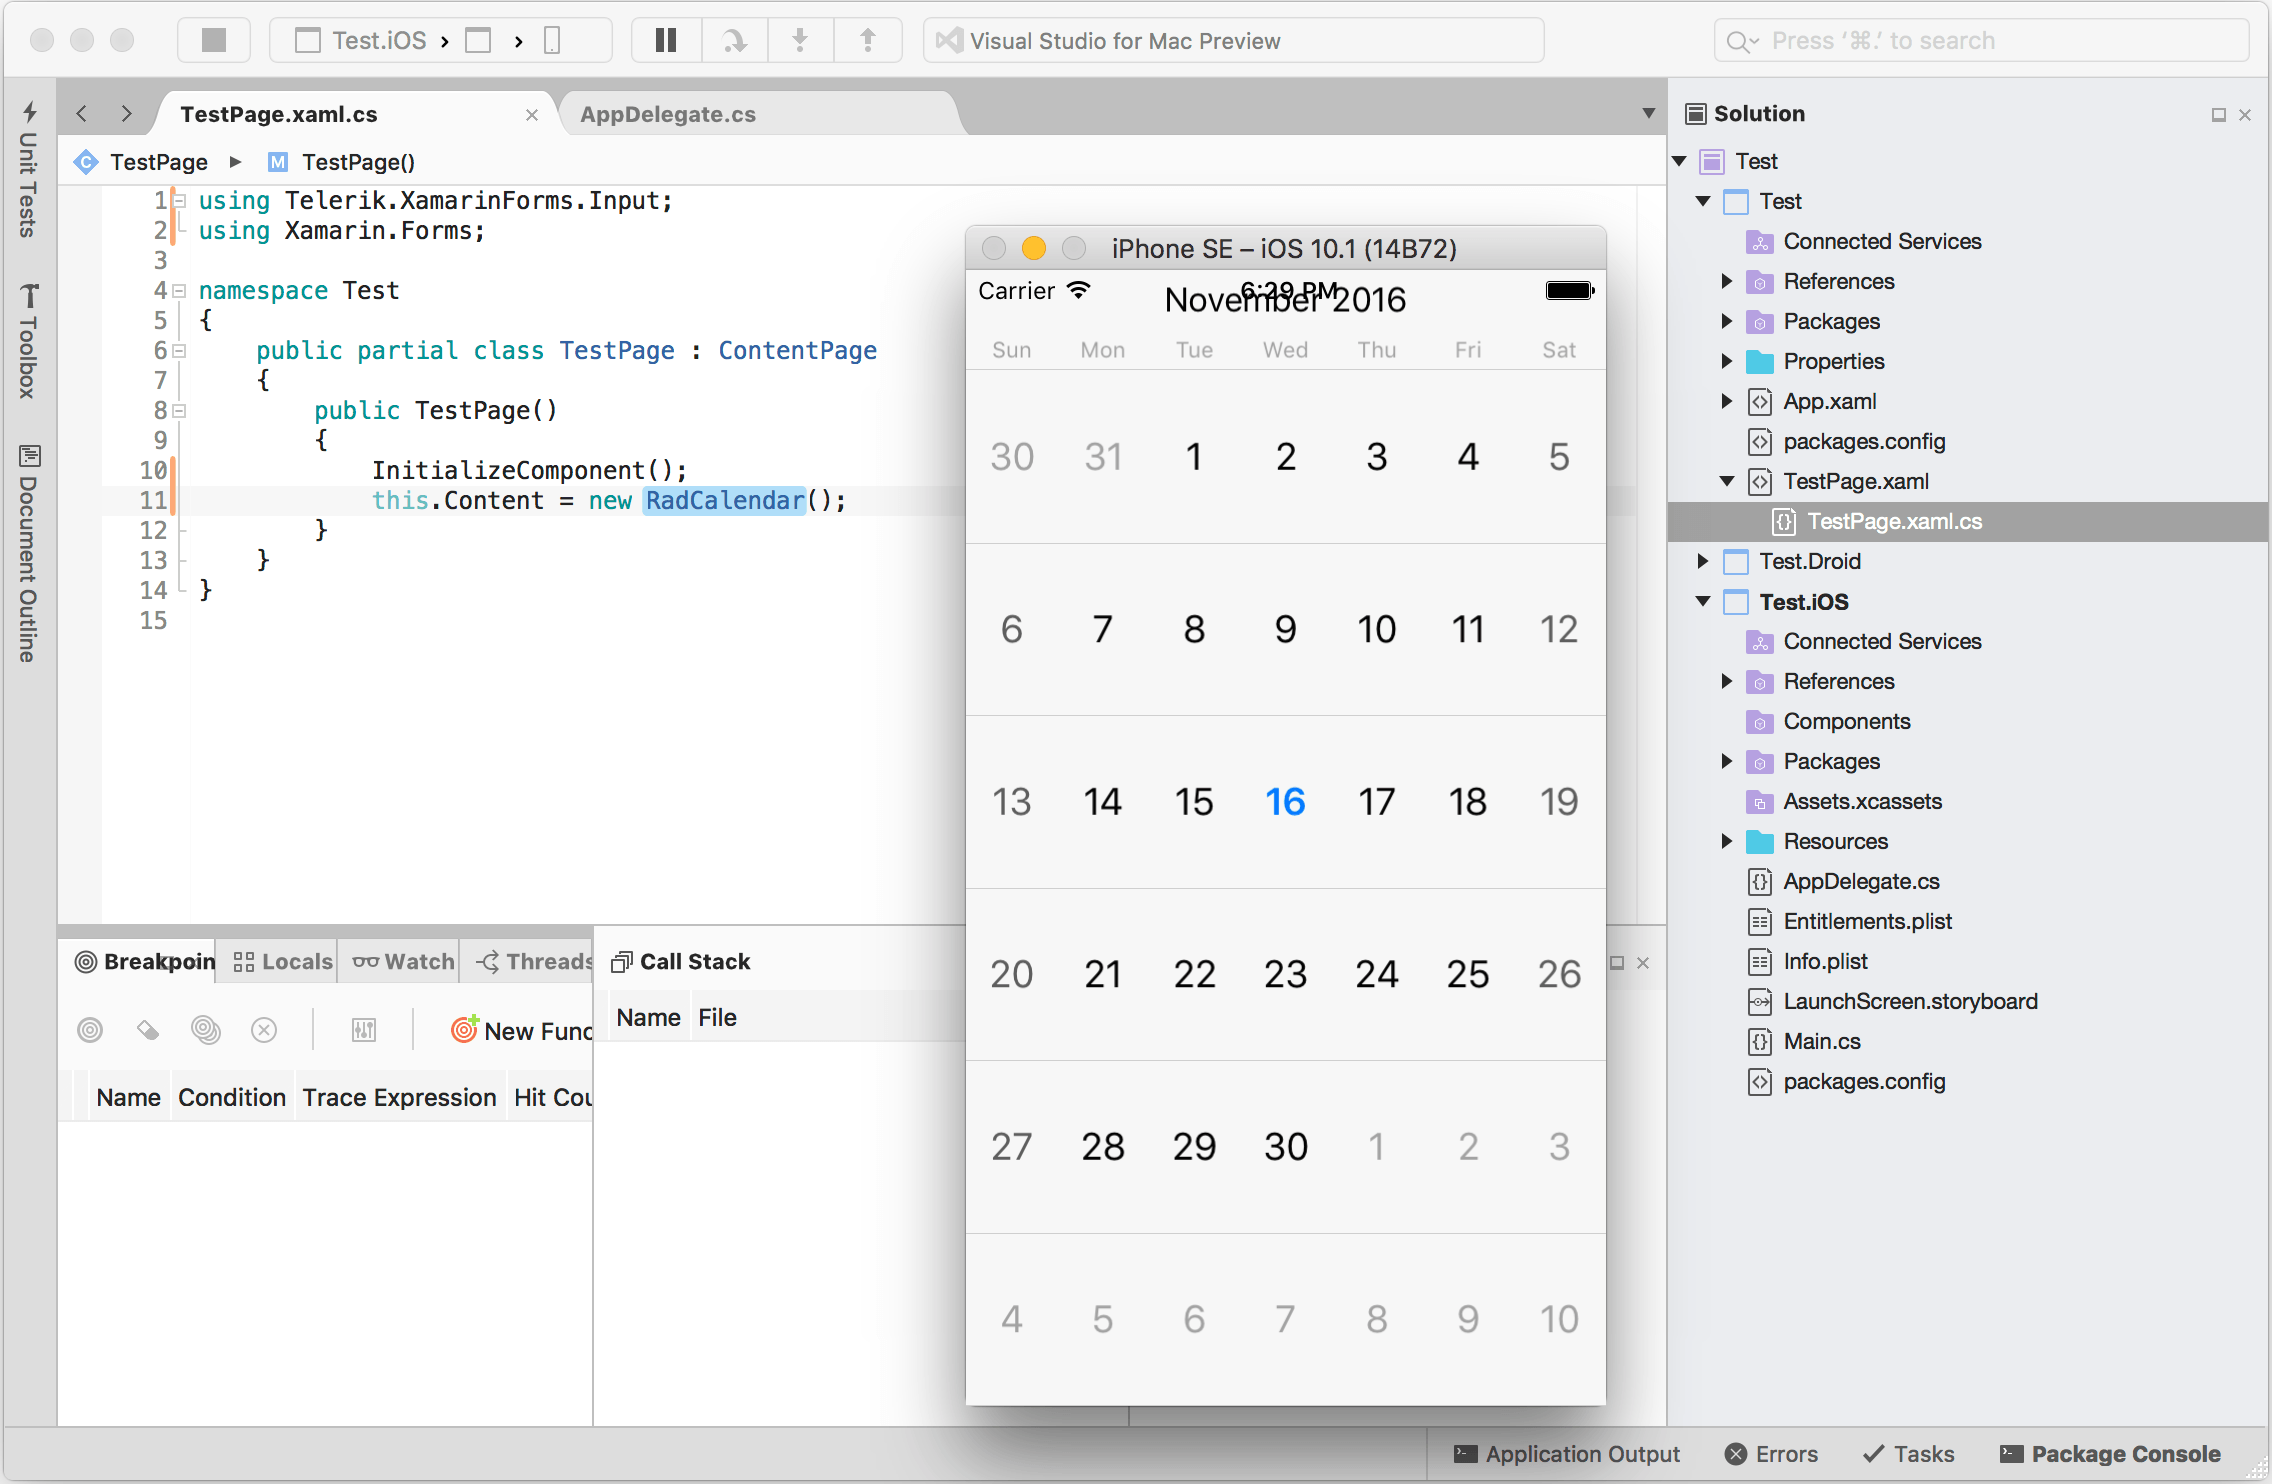 xamarin forms project in visual studio for mac